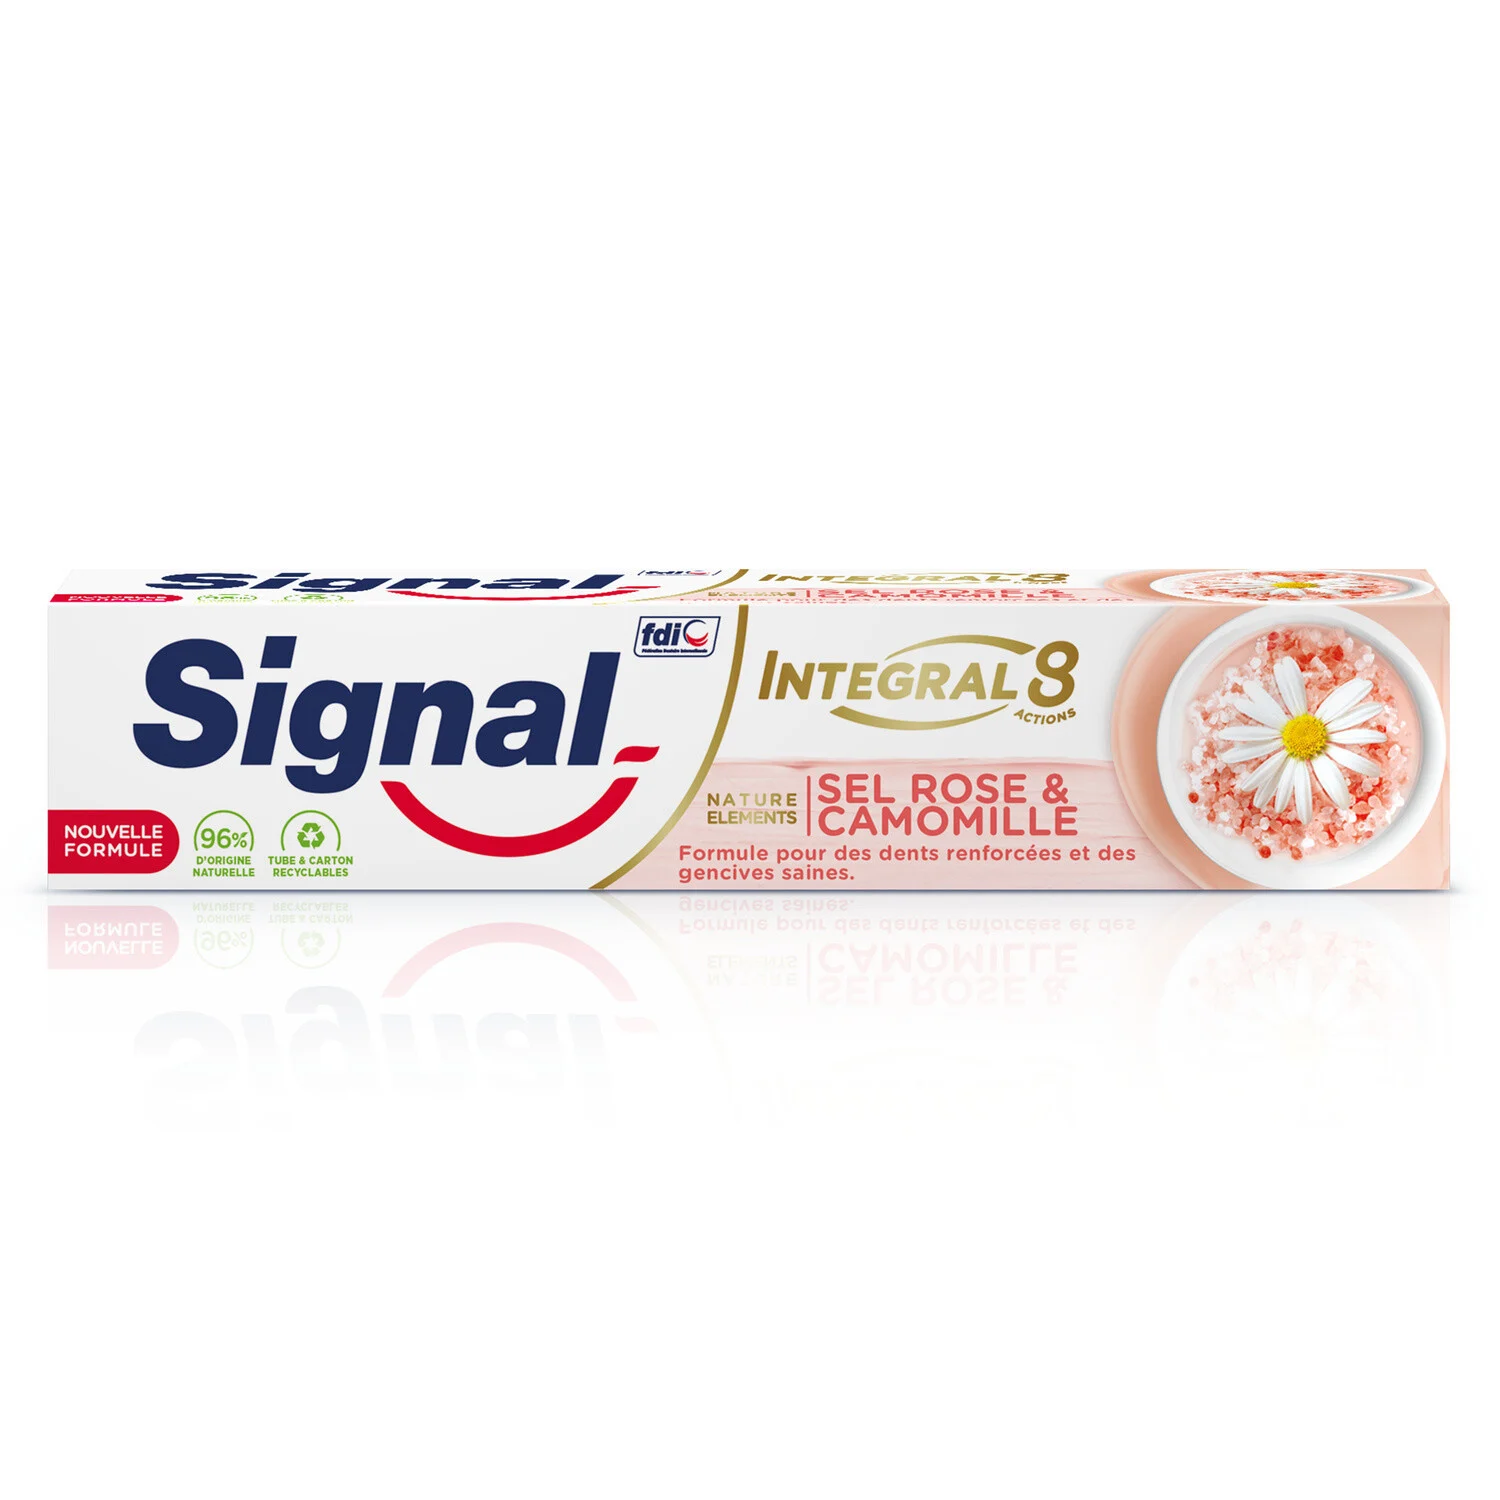 Dentifrice Integral 8 Nature Elements Sel Rose & Camomille 75ml- Signal